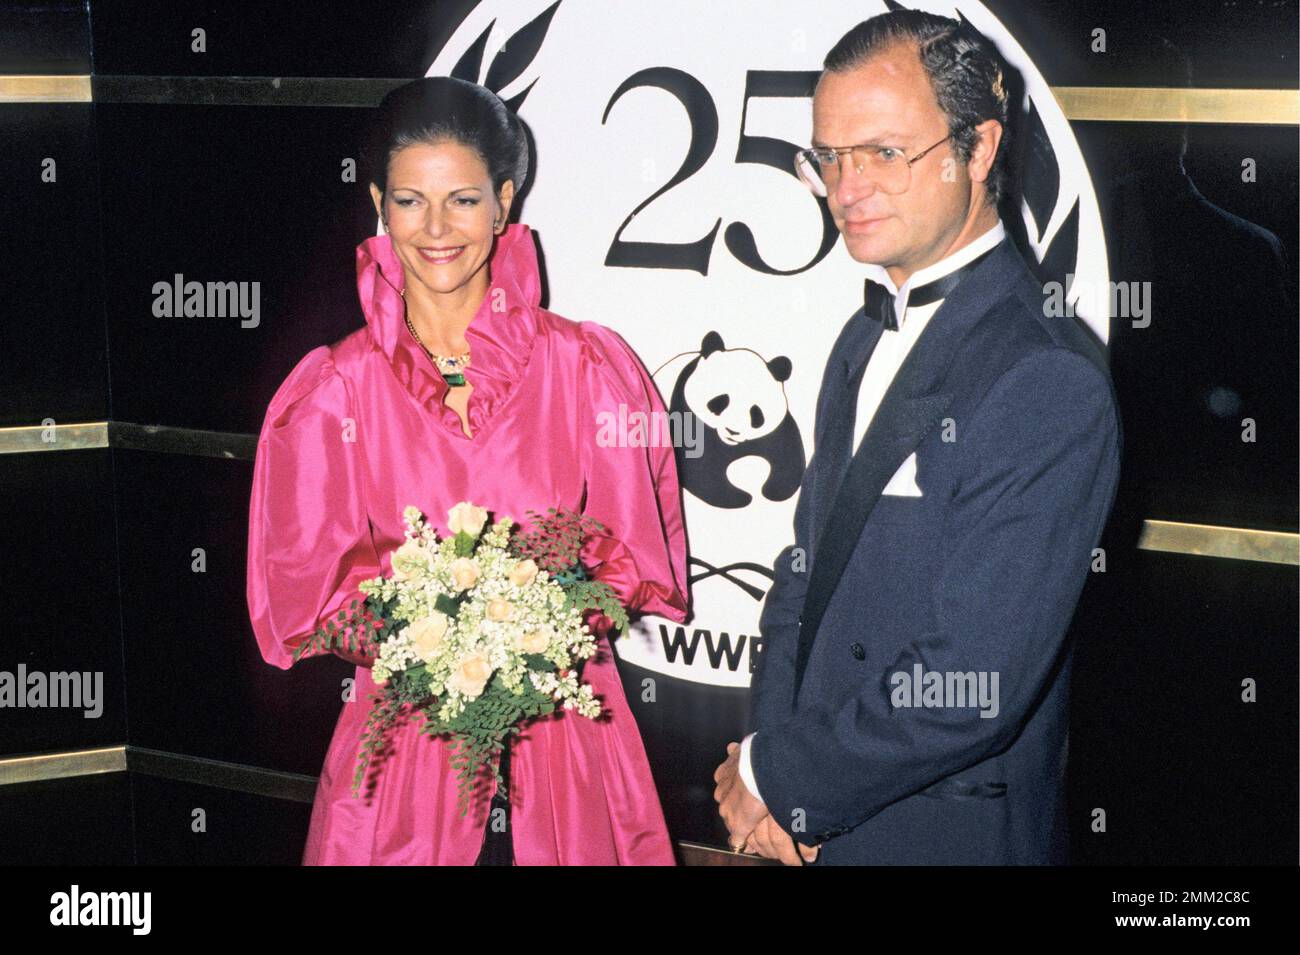 Carl XVI Gustaf, King of Sweden. Born 30 april 1946.  The King Carl XVI Gustaf and Queen Silvia Renate Sommerlath 1988. Stock Photo